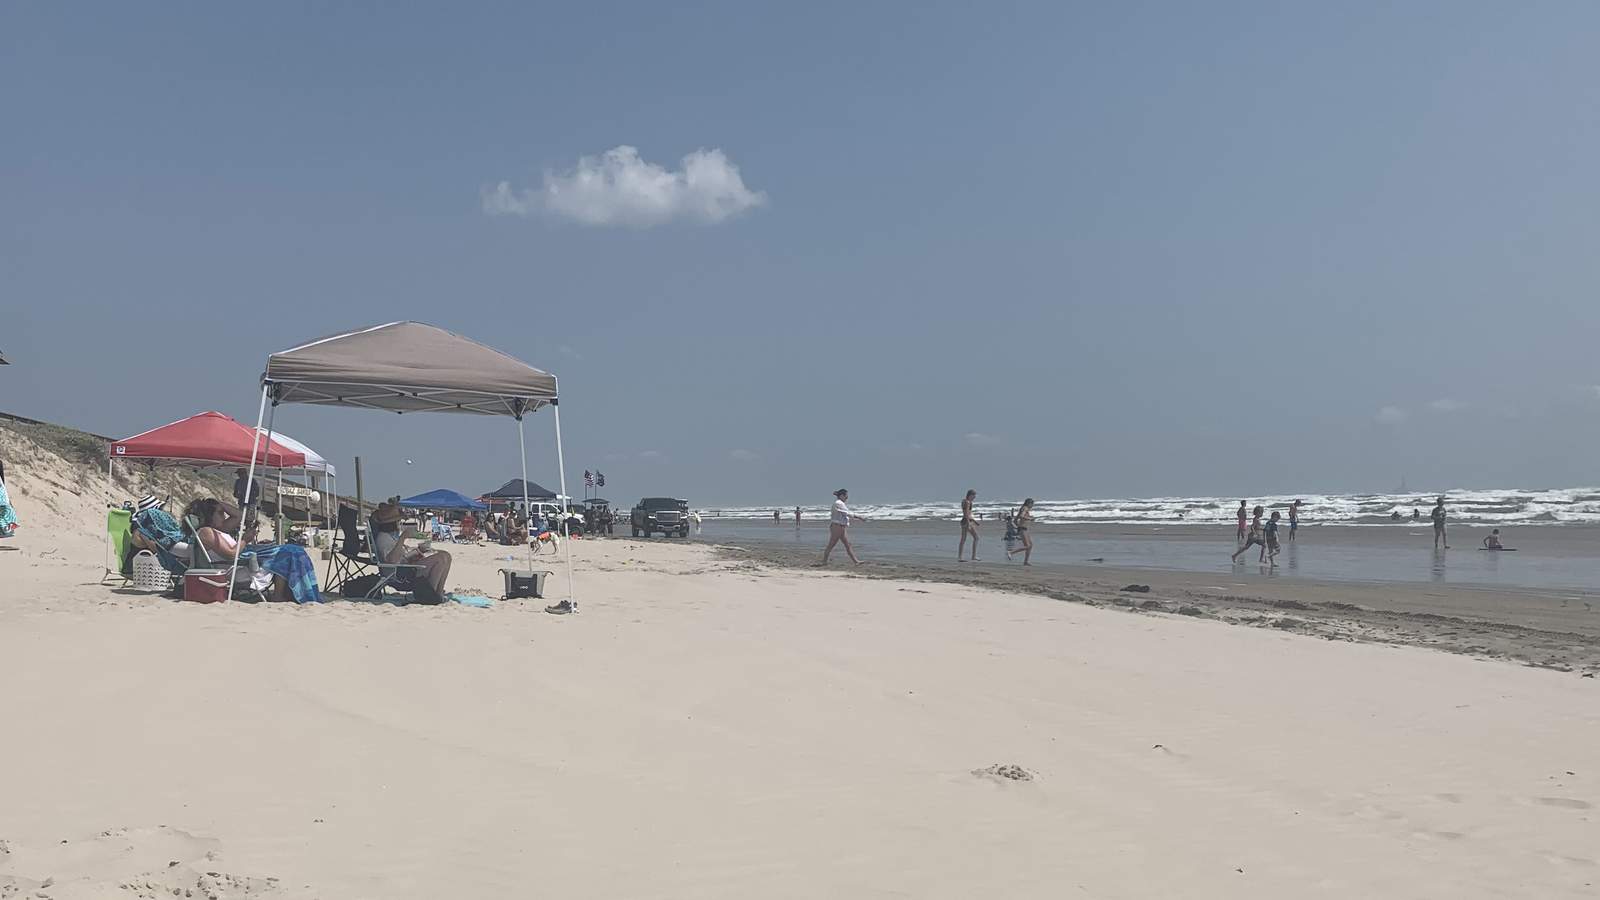 Port Aransas beaches will close to vehicles as mayor issues declaration of disaster